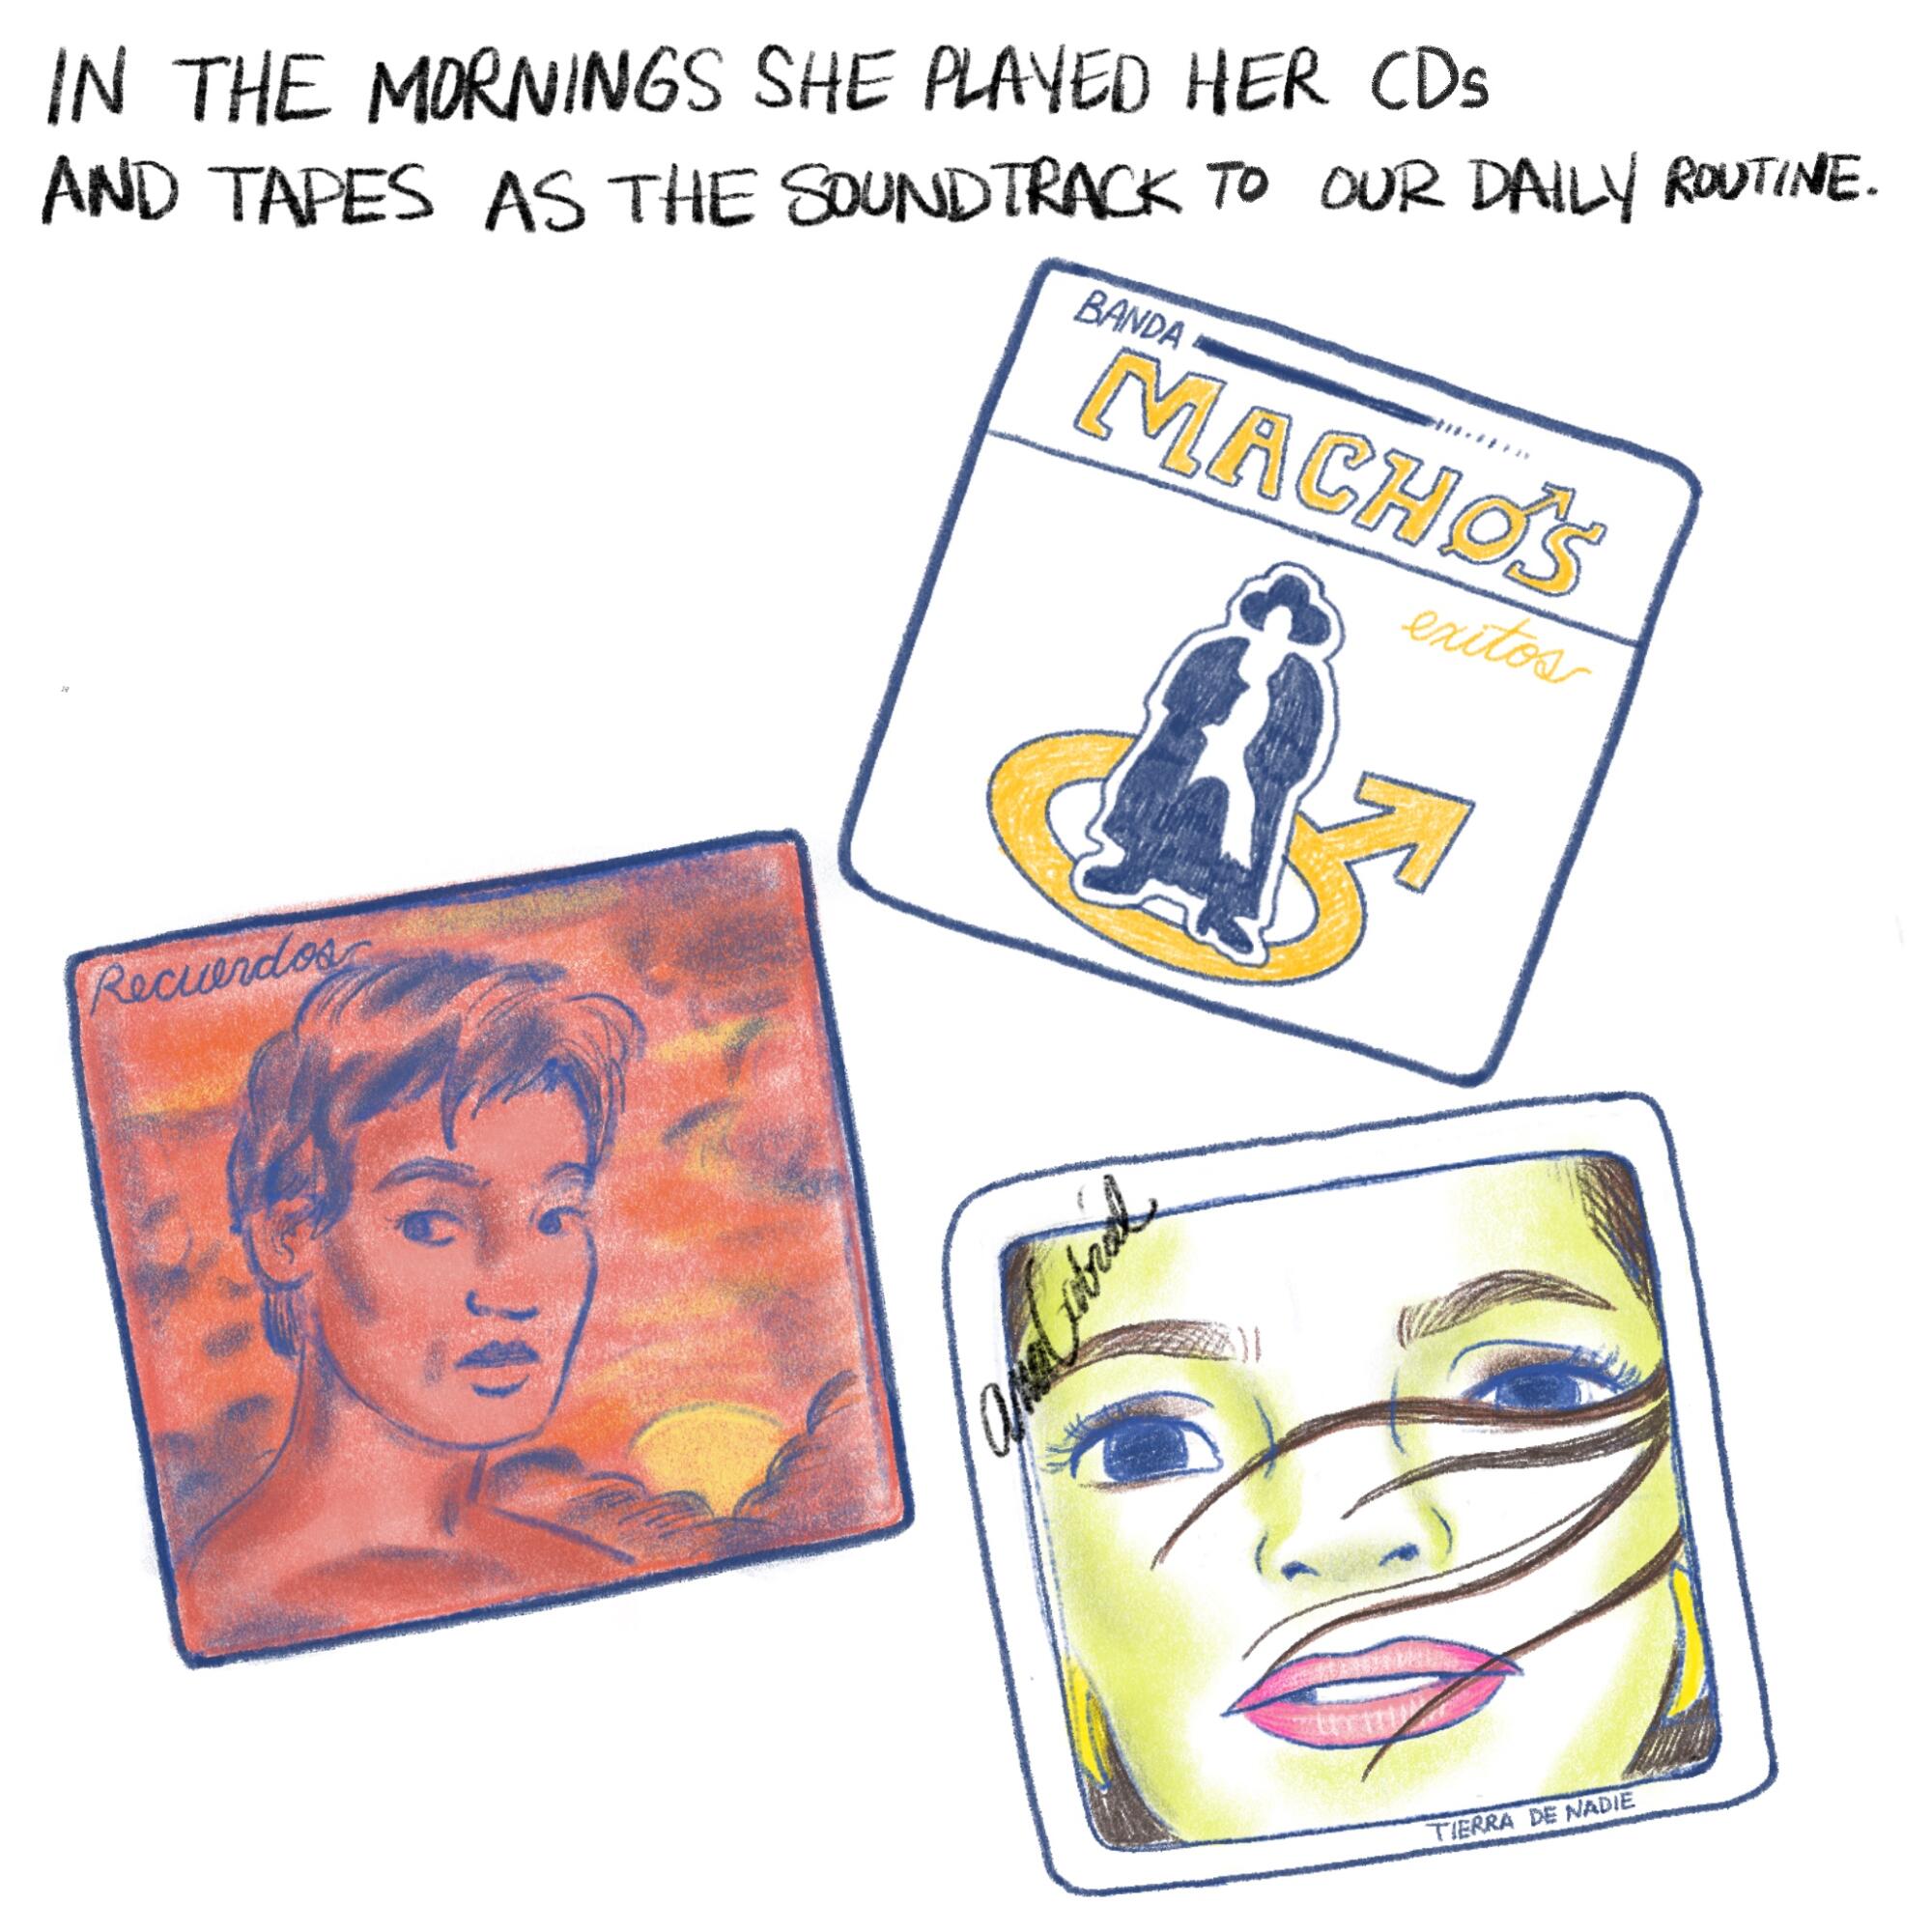 In the morning she played her CDs and tapes as the soundtrack for our daily routine. 